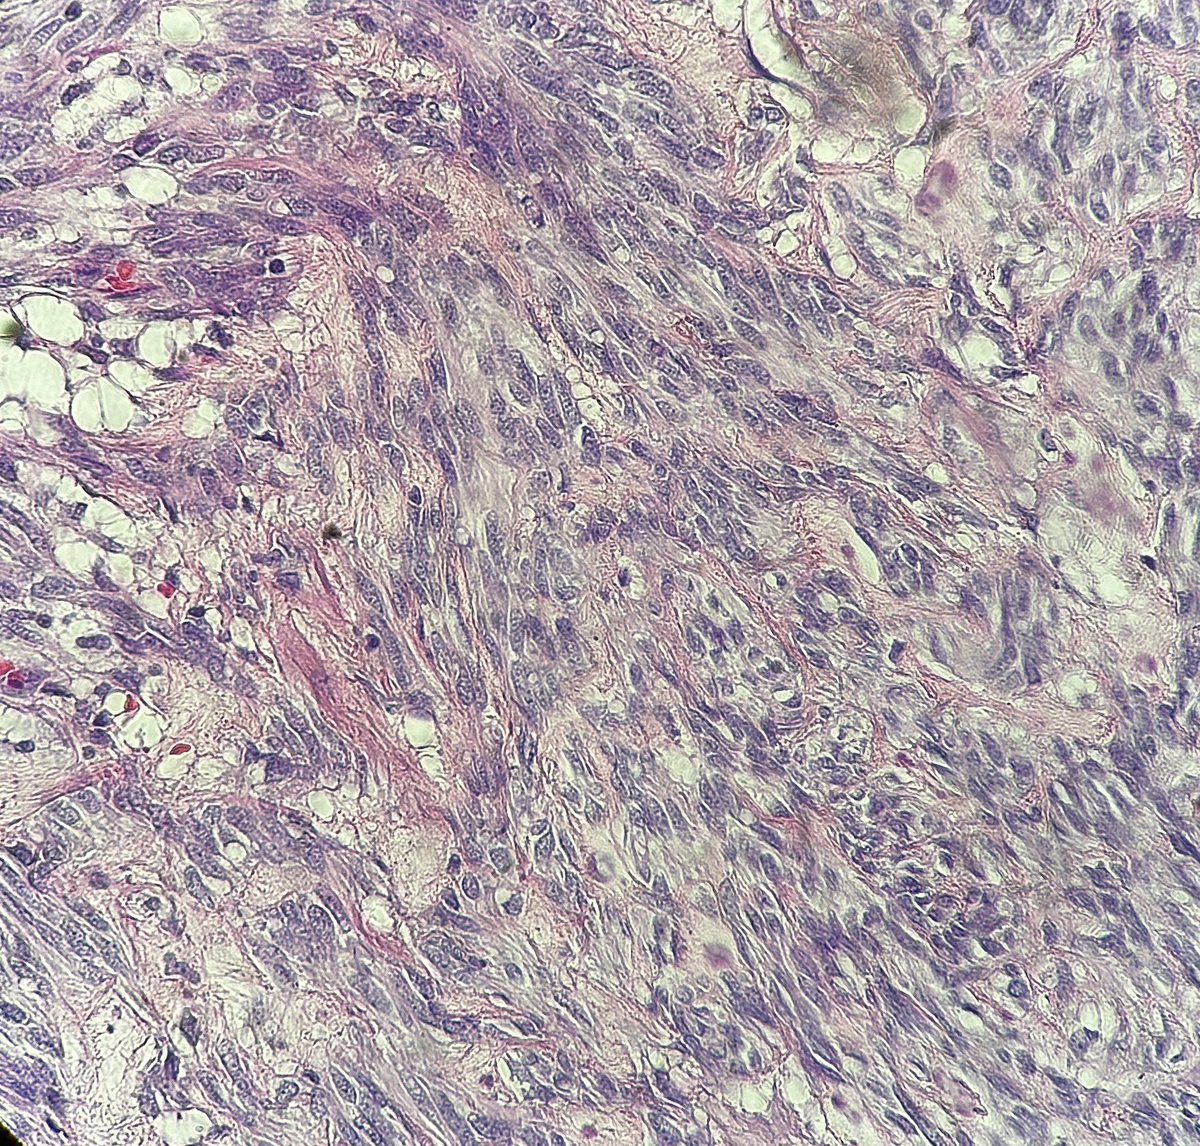 I arise from the interstitial cells of Cajal

I am a (relatively) common soft tissue neoplasm in the stomach

I can be treated with Gleevec

Who am I?

#pathagonia #pathx #medstudentx #gensurg #surgonc #hemeonc #surgpath #gipath #gastroenterology #medx #medtwitter #pathtwitter